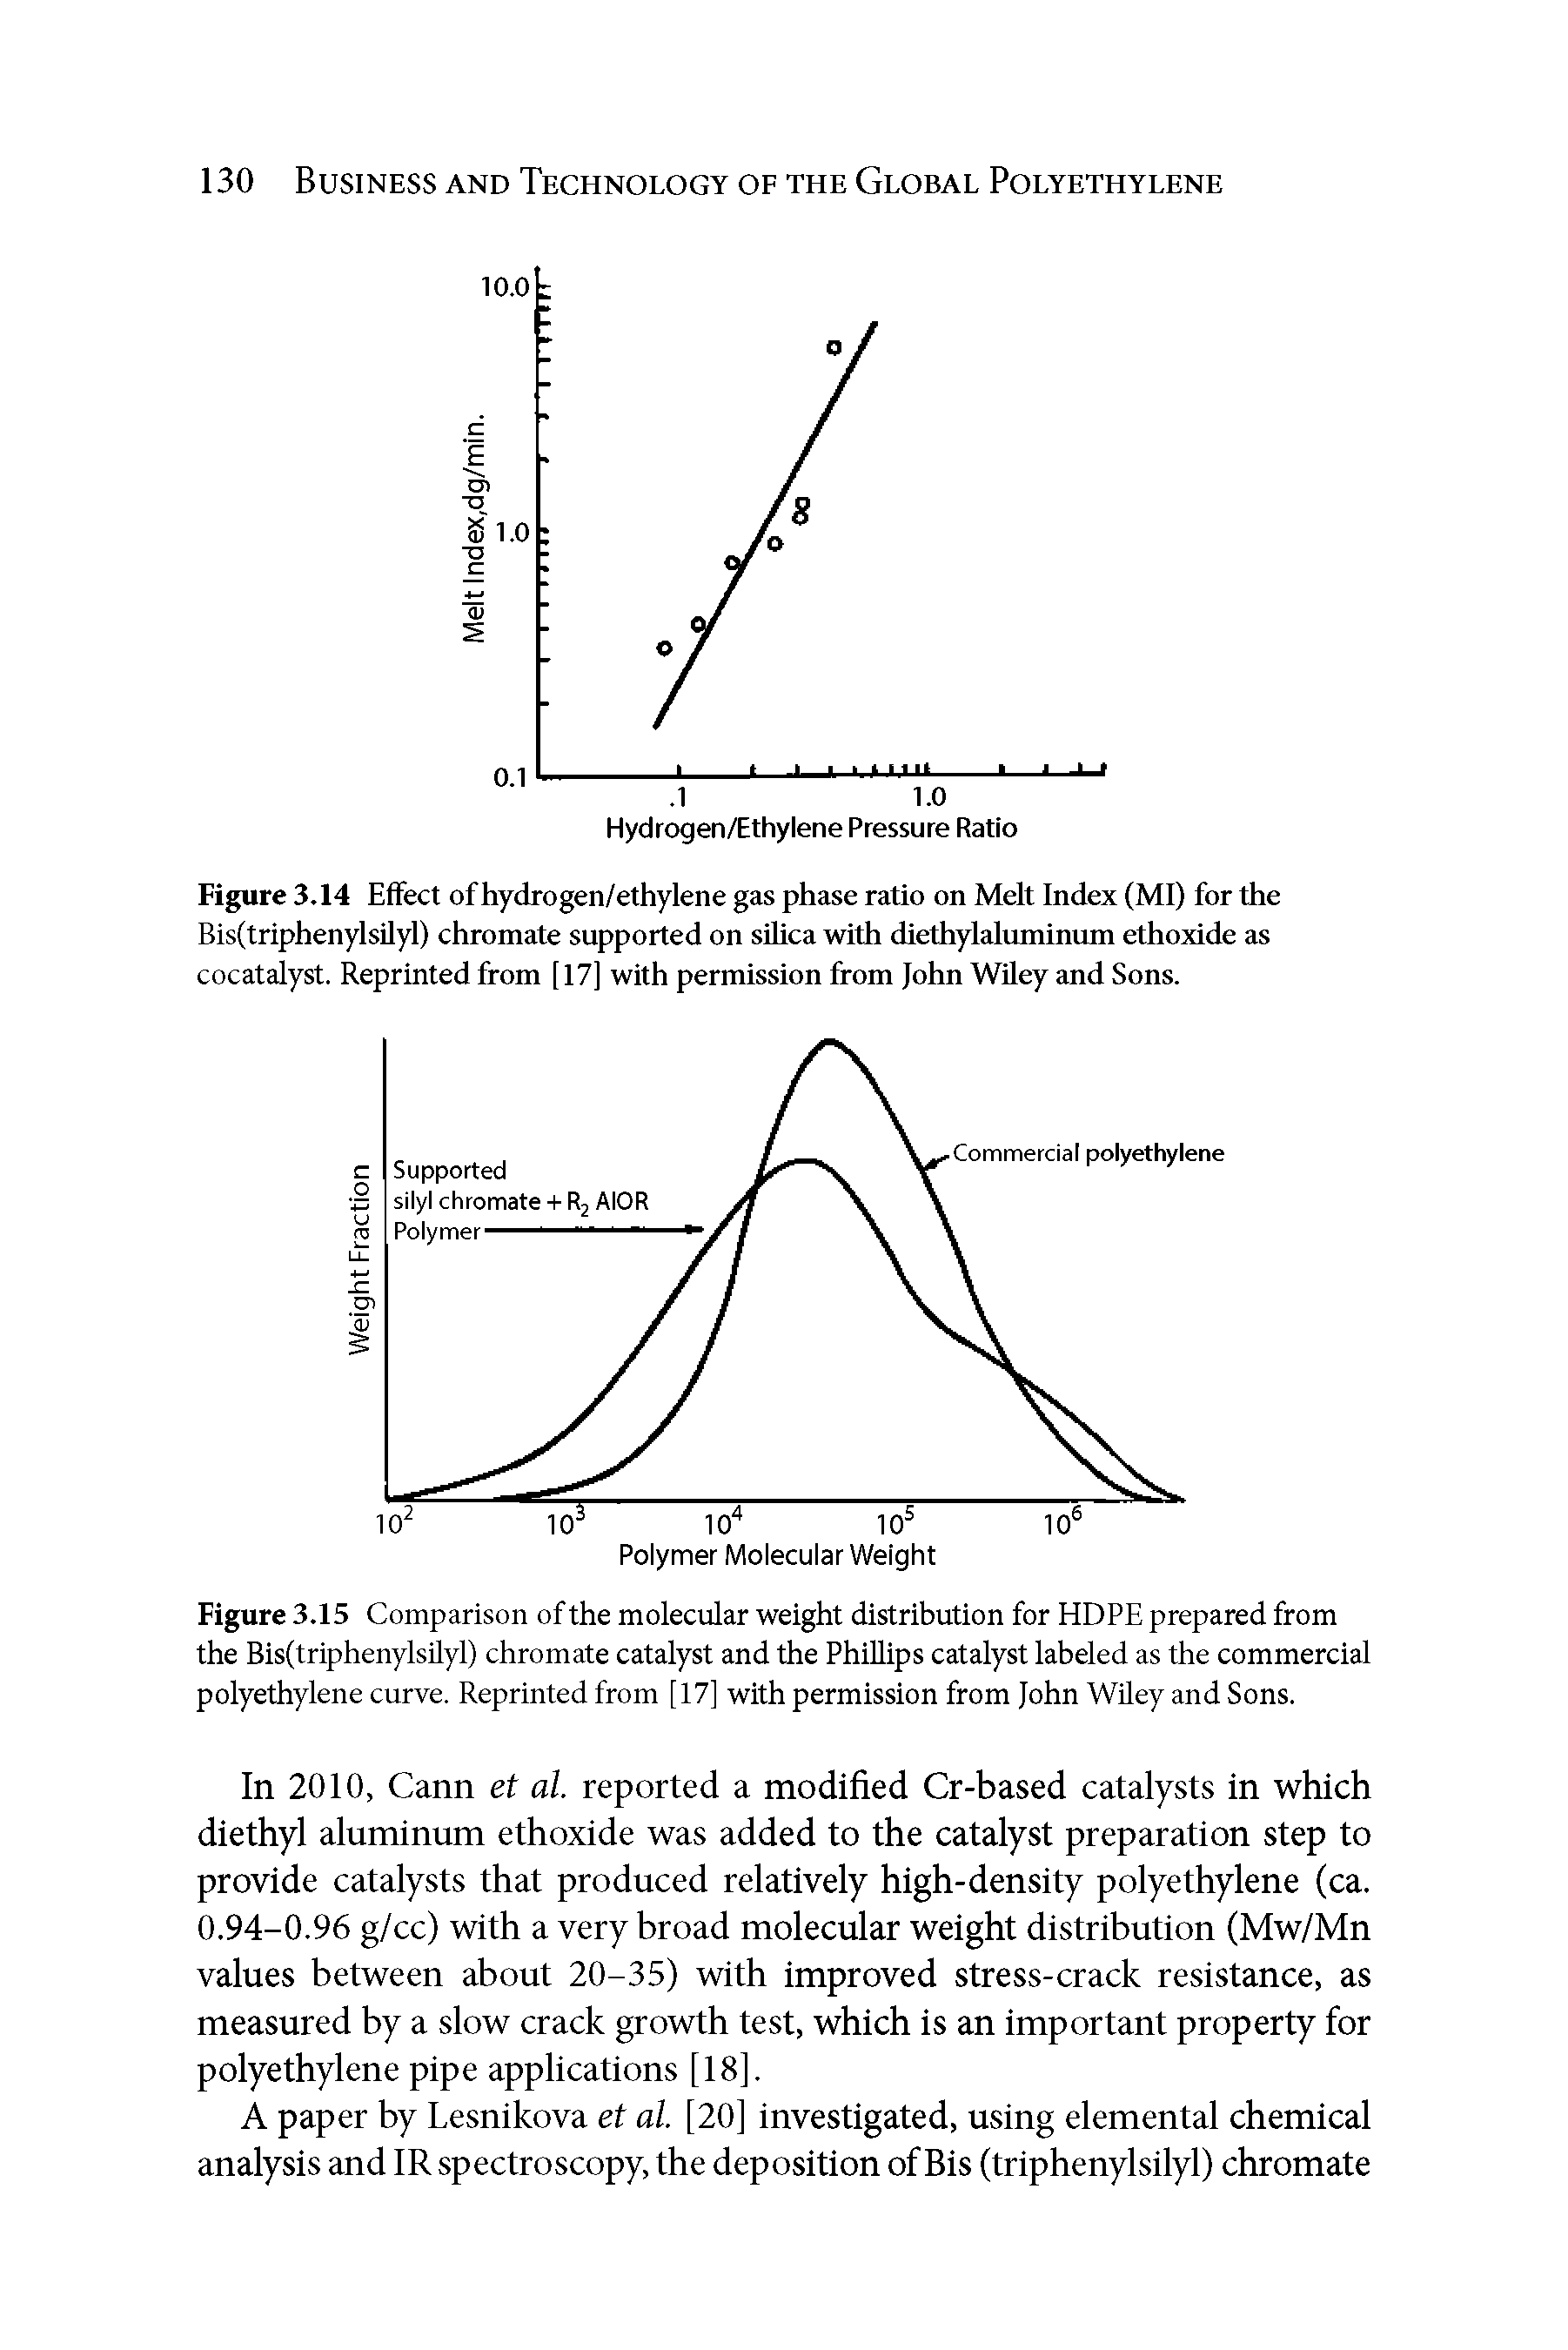 Figure 3.15 Comparison of the molecular weight distribution for HDPE prepared from the Bis(triphenylsilyl) chromate catalyst and the Phillips catalyst labeled as the commercial polyethylene curve. Reprinted from [17] with permission from John WUey and Sons.